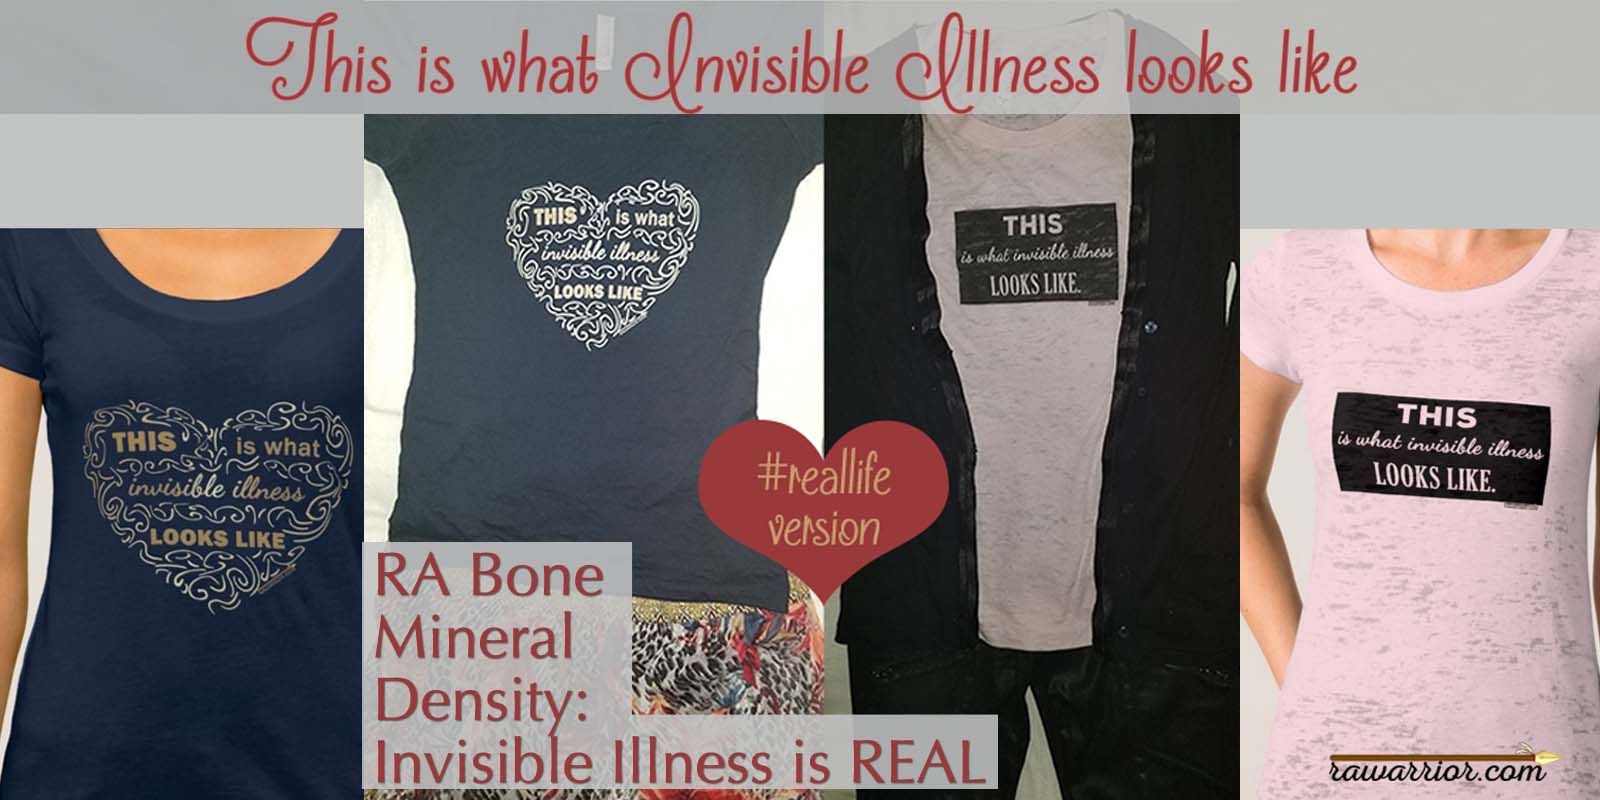 RA Bone Mineral Density is another indicator of invisible illness in RA / RD